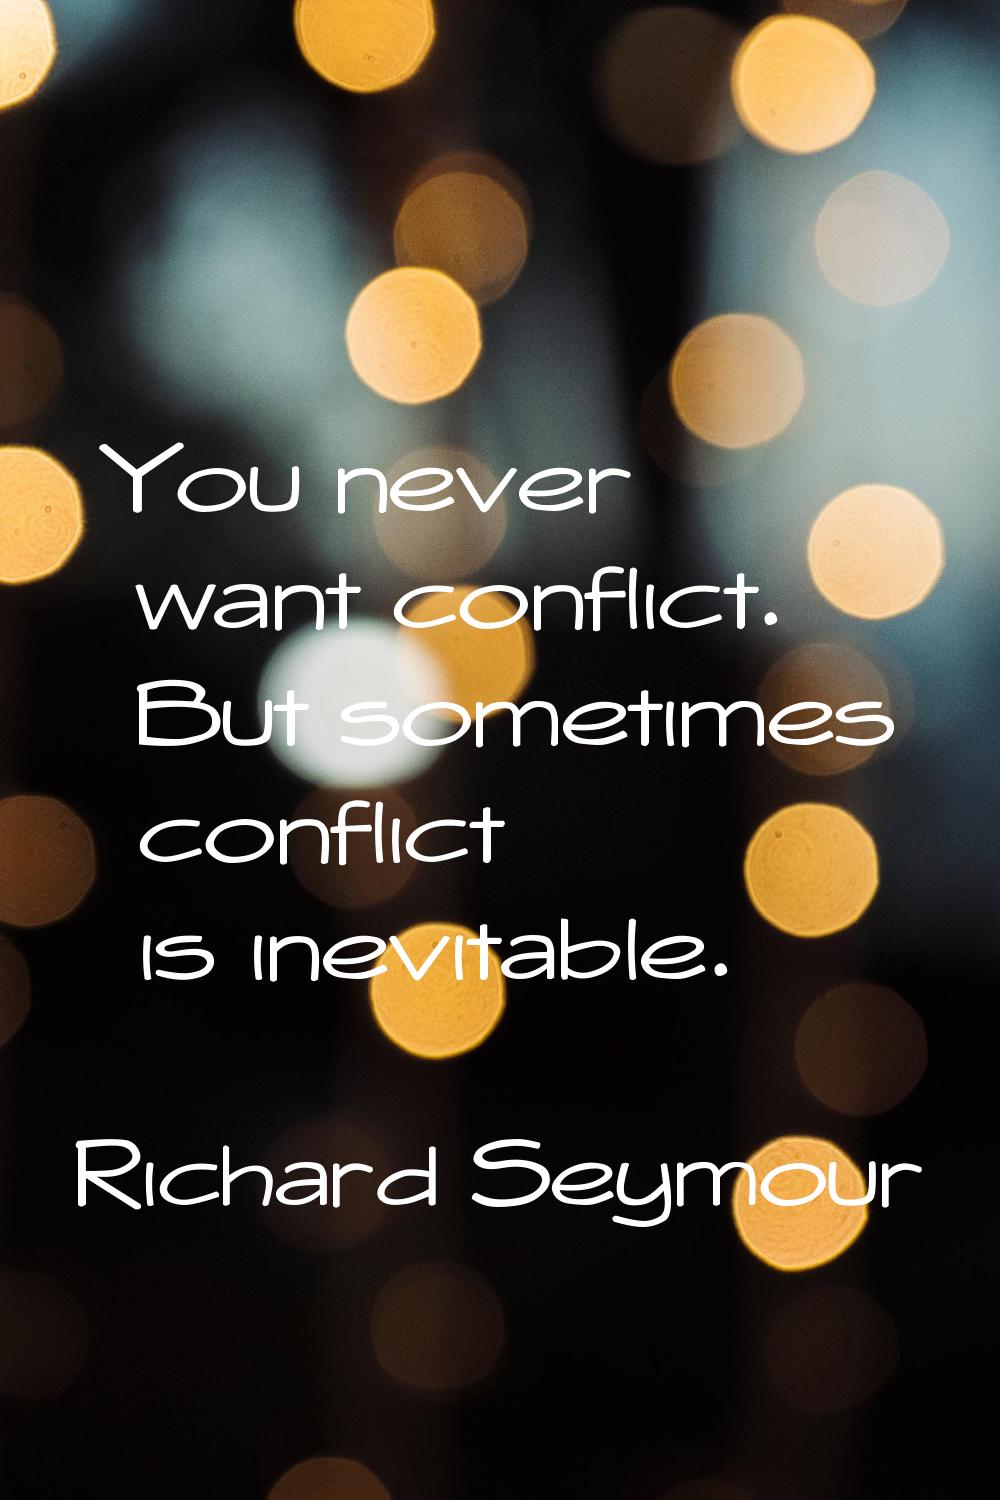 You never want conflict. But sometimes conflict is inevitable.